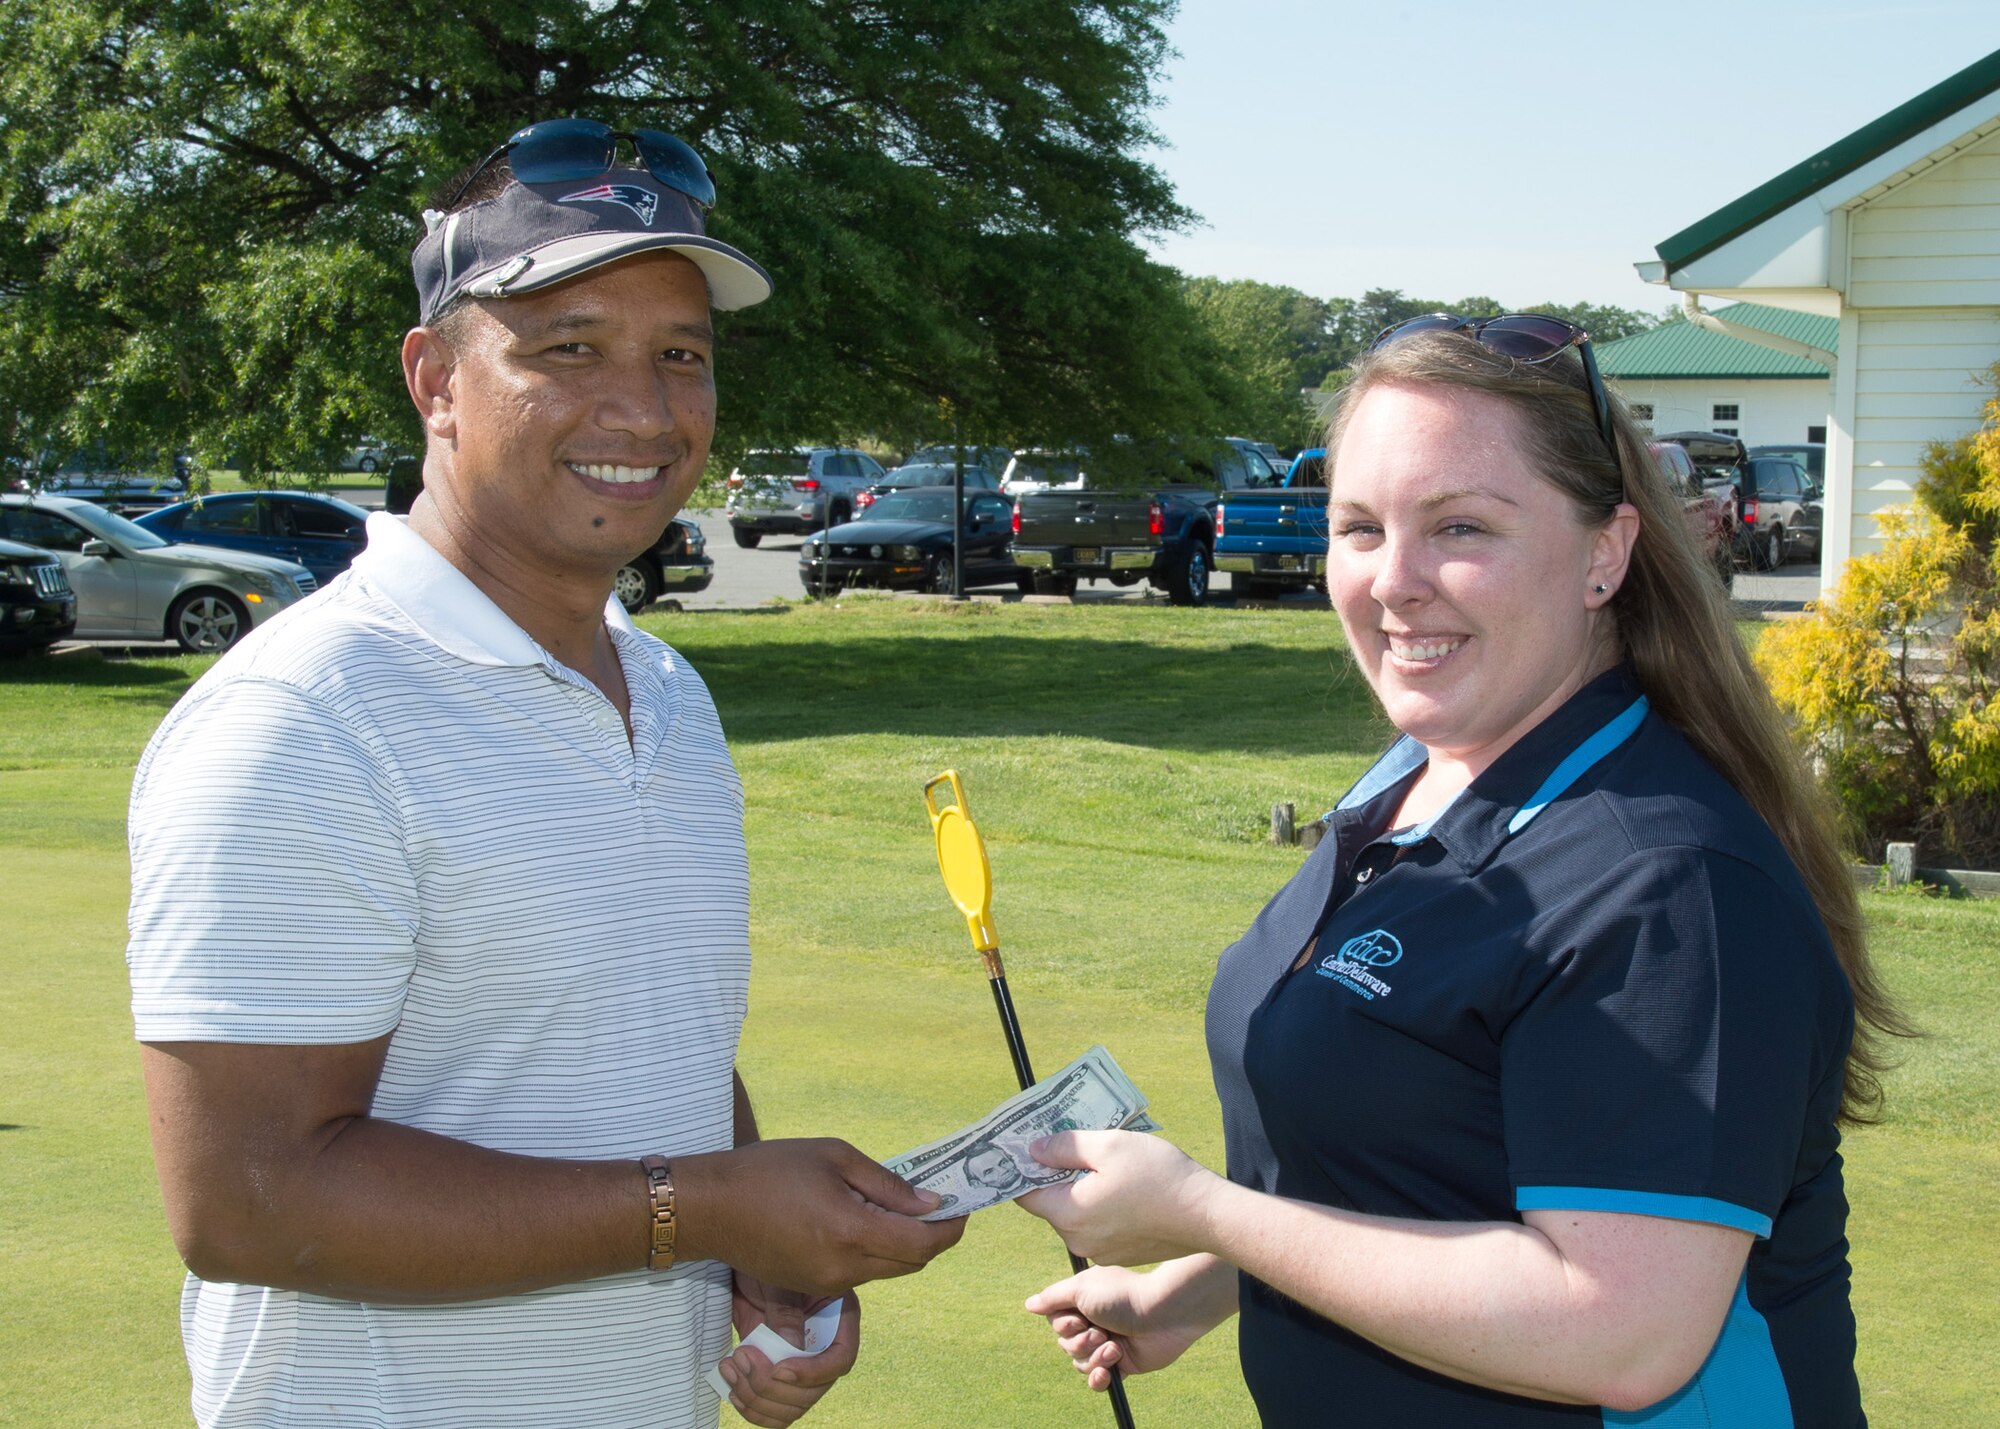 Cristal Brenneman, Central Delaware Chamber of Commerce Director of Special Events, awards Erol Gutierrez, shift manager at the Harrington Casino, prize money at the 2017 spring Bluesuiters Golf Tournament May 17, 2017, 2016, at the Jonathan’s Landing Golf Course in Magnolia, Delaware. Gutierrez won the prize money when his golf ball landed closest to the putting hole. (U.S. Air Force photo by Mauricio Campino)